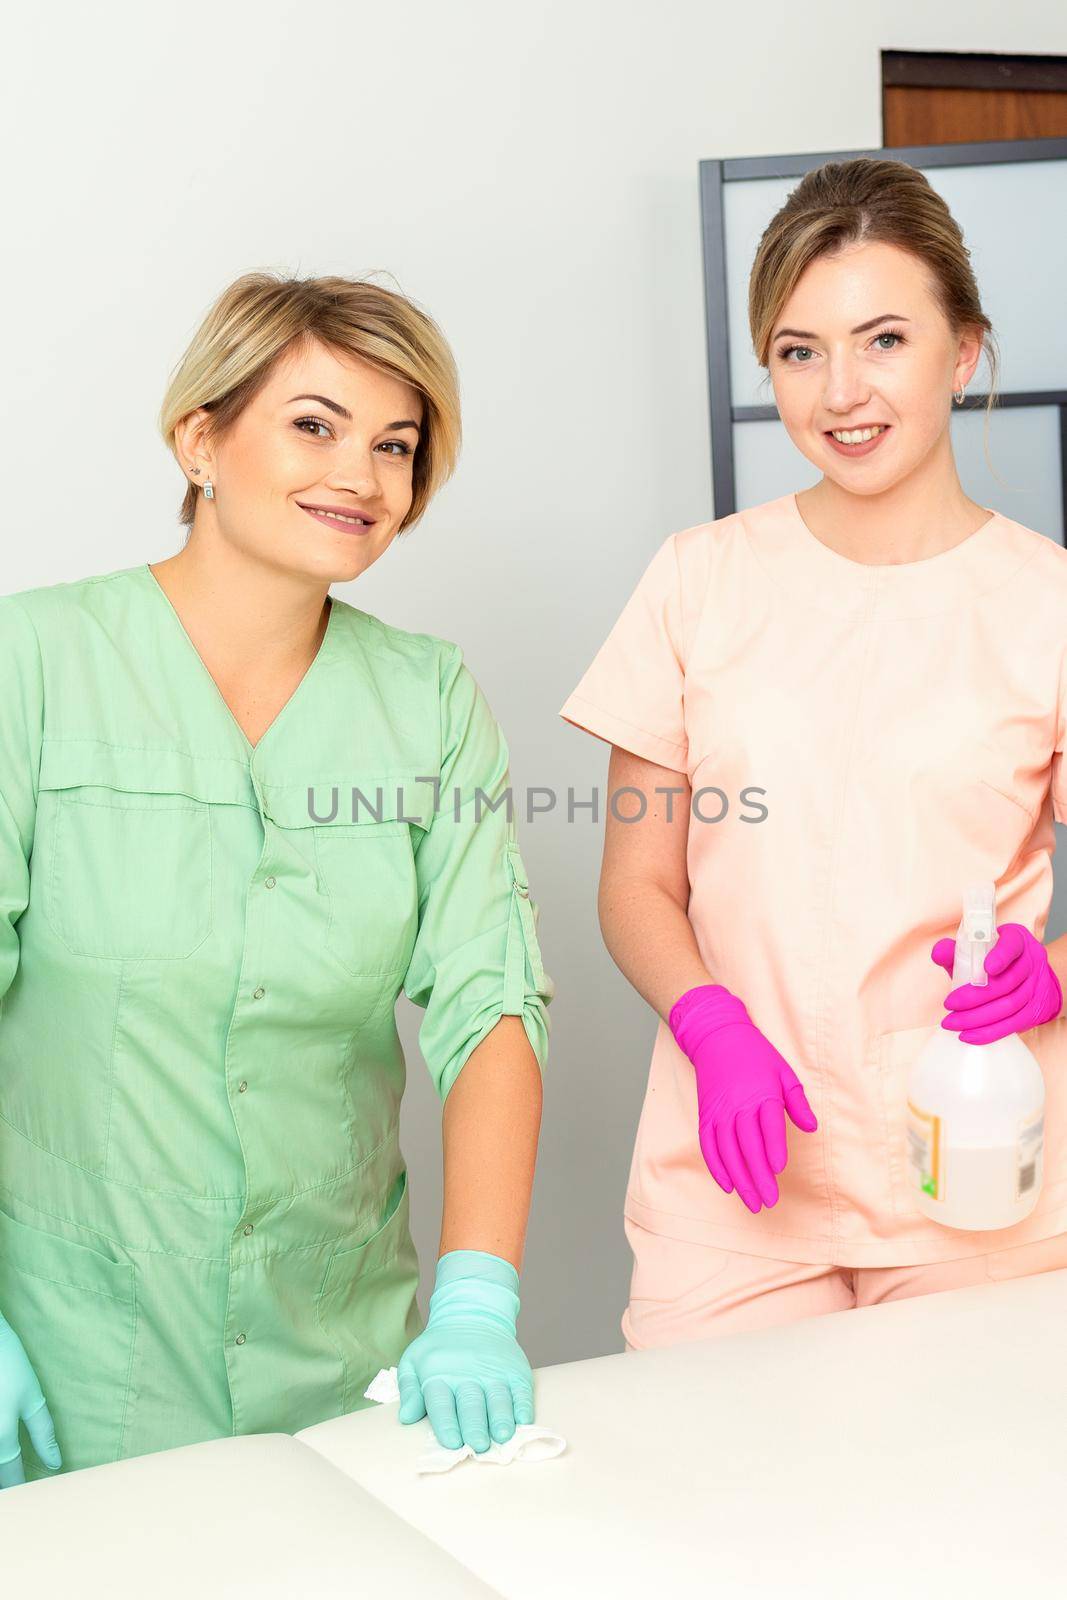 Two medical workers disinfect the patient's couch with sanitizer spray and a clean napkin. Health and hygiene concept. by okskukuruza